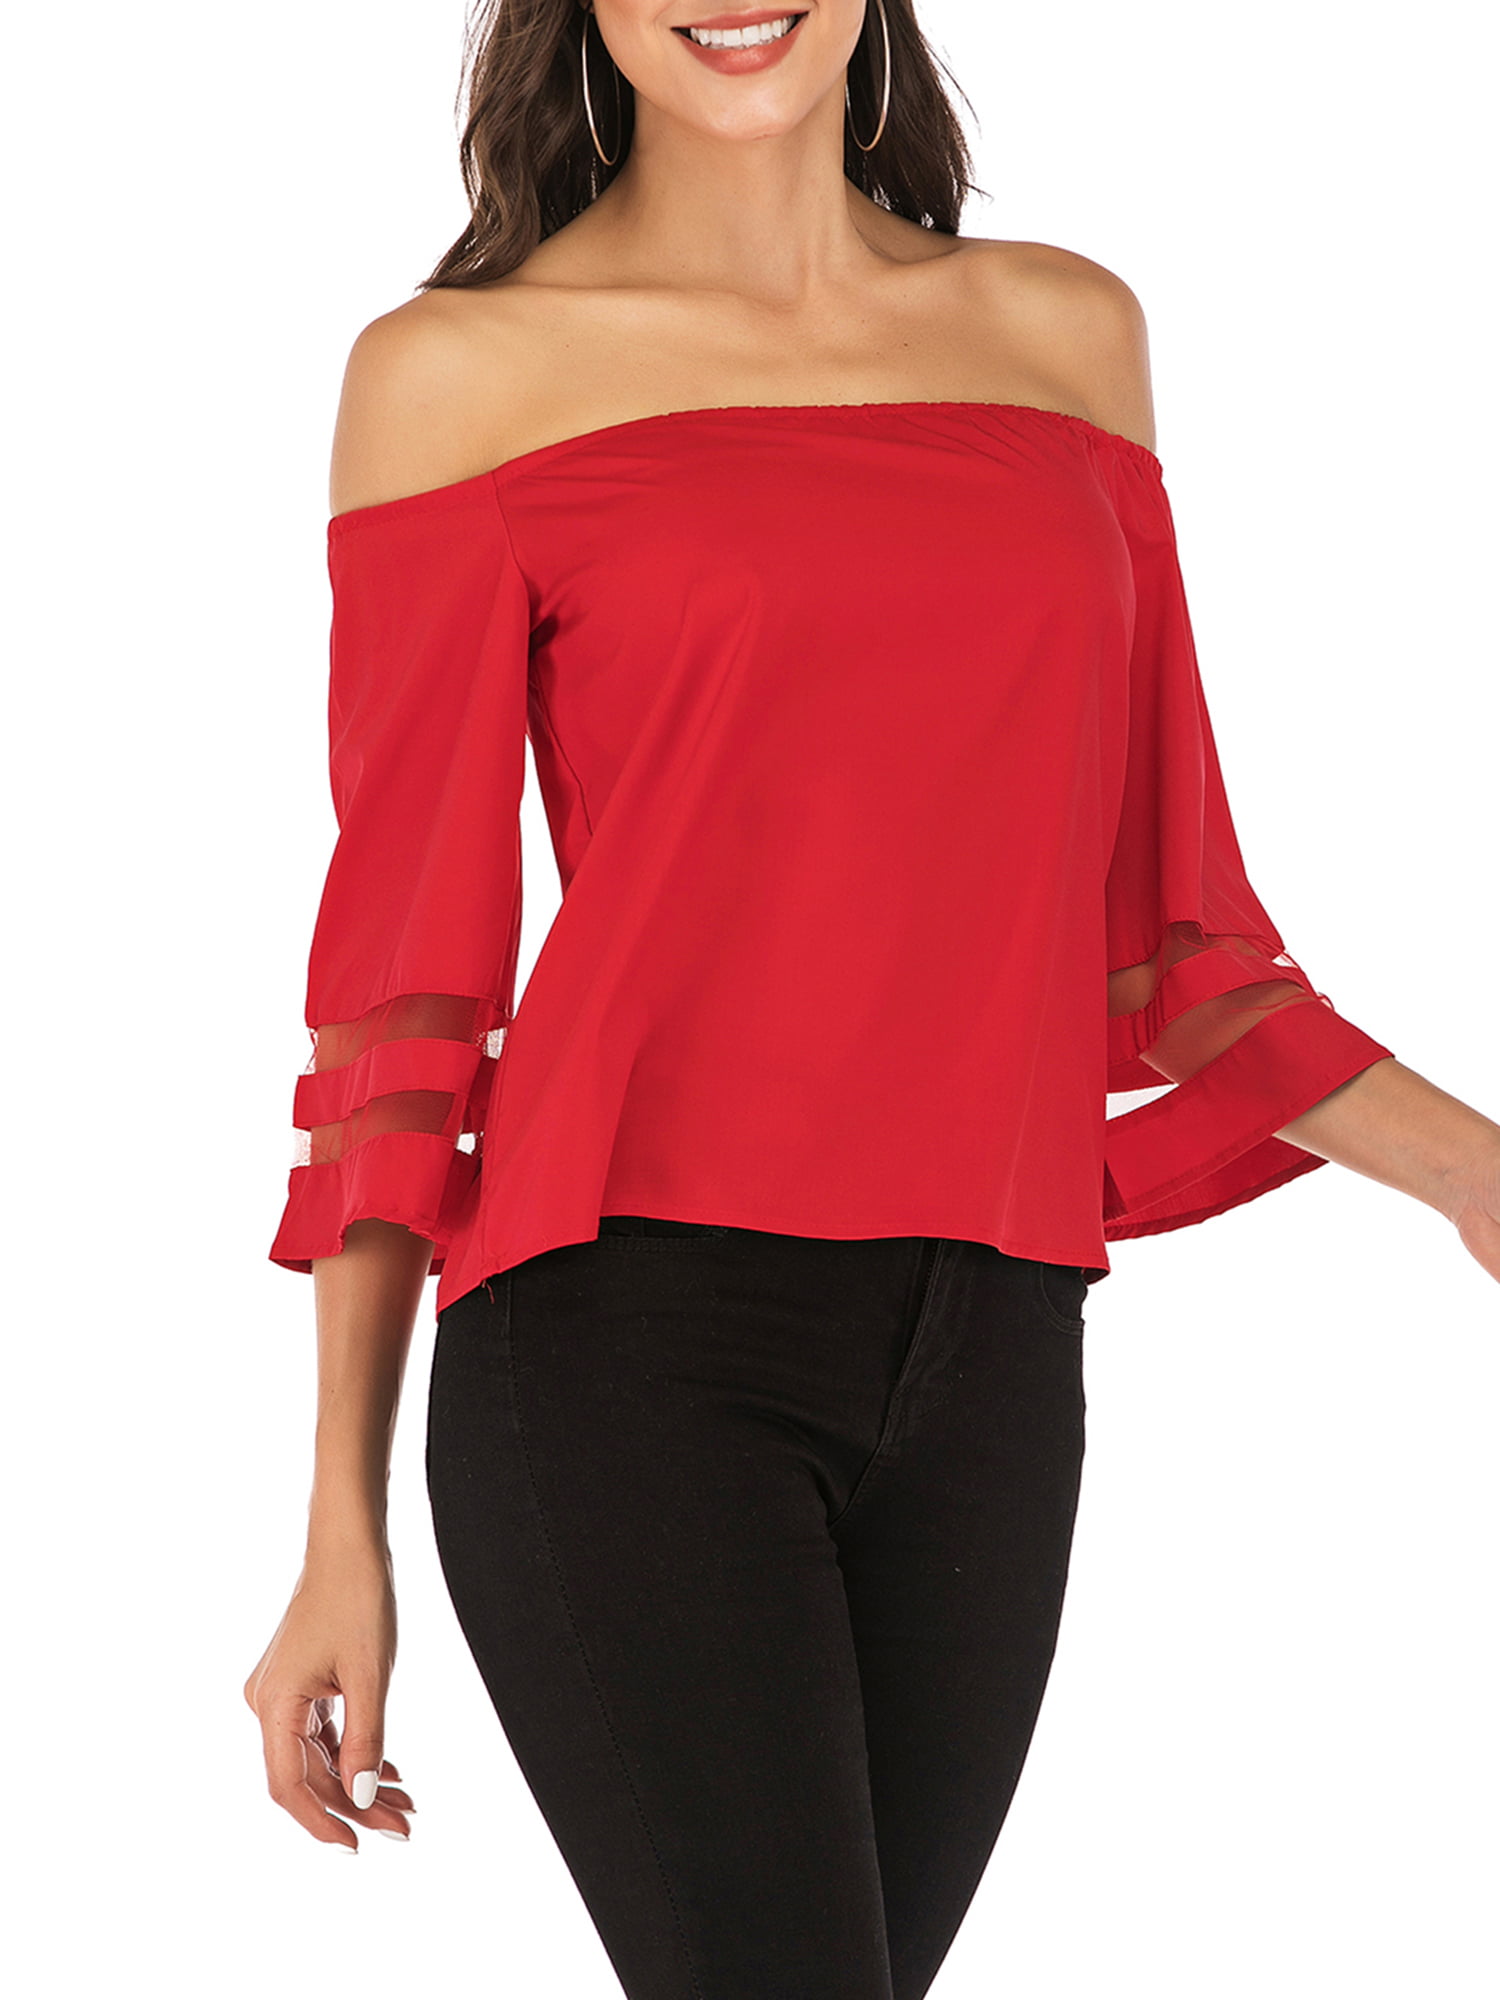 Sayfut Sexy Off Shoulder Tops For Women 34 Sleeve Elegant Shirts Cold